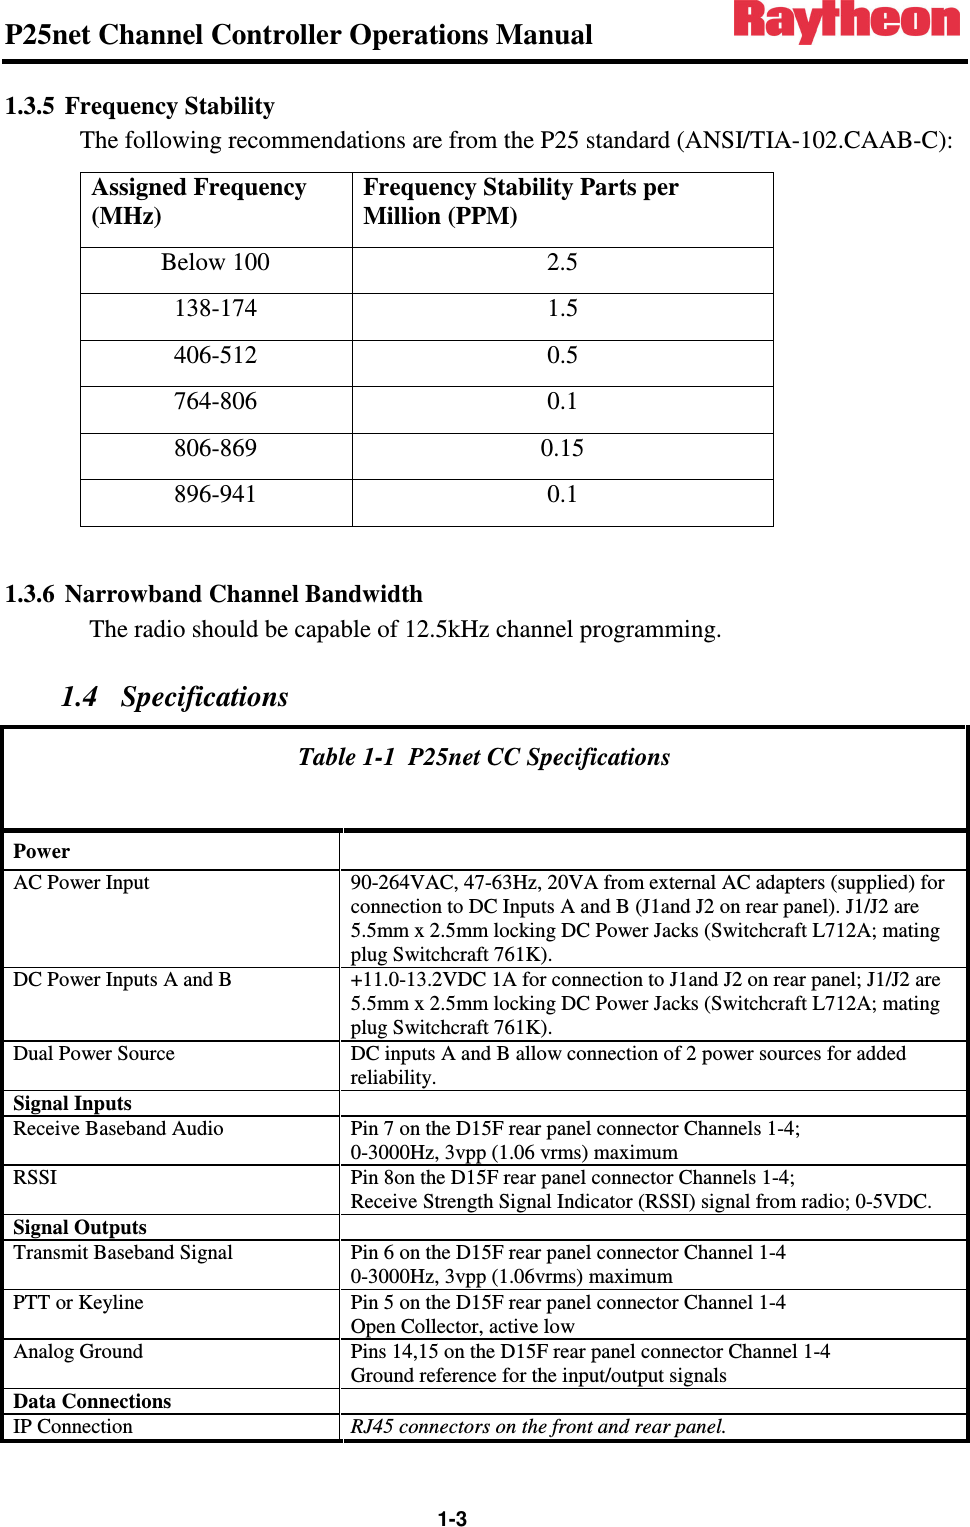 P25net Channel Controller Operations Manual                                                                                                   1-3 1.3.5 Frequency Stability The following recommendations are from the P25 standard (ANSI/TIA-102.CAAB-C): Assigned Frequency (MHz) Frequency Stability Parts per Million (PPM) Below 100  2.5 138-174  1.5 406-512  0.5 764-806  0.1 806-869  0.15 896-941  0.1  1.3.6 Narrowband Channel Bandwidth The radio should be capable of 12.5kHz channel programming. 1.4 Specifications Table 1-1  P25net CC Specifications  Power   AC Power Input  90-264VAC, 47-63Hz, 20VA from external AC adapters (supplied) for connection to DC Inputs A and B (J1and J2 on rear panel). J1/J2 are 5.5mm x 2.5mm locking DC Power Jacks (Switchcraft L712A; mating plug Switchcraft 761K).  DC Power Inputs A and B   +11.0-13.2VDC 1A for connection to J1and J2 on rear panel; J1/J2 are 5.5mm x 2.5mm locking DC Power Jacks (Switchcraft L712A; mating plug Switchcraft 761K). Dual Power Source  DC inputs A and B allow connection of 2 power sources for added reliability. Signal Inputs     Receive Baseband Audio  Pin 7 on the D15F rear panel connector Channels 1-4; 0-3000Hz, 3vpp (1.06 vrms) maximum  RSSI  Pin 8on the D15F rear panel connector Channels 1-4; Receive Strength Signal Indicator (RSSI) signal from radio; 0-5VDC. Signal Outputs   Transmit Baseband Signal Pin 6 on the D15F rear panel connector Channel 1-4 0-3000Hz, 3vpp (1.06vrms) maximum PTT or Keyline  Pin 5 on the D15F rear panel connector Channel 1-4 Open Collector, active low Analog Ground  Pins 14,15 on the D15F rear panel connector Channel 1-4 Ground reference for the input/output signals Data Connections   IP Connection  RJ45 connectors on the front and rear panel. 